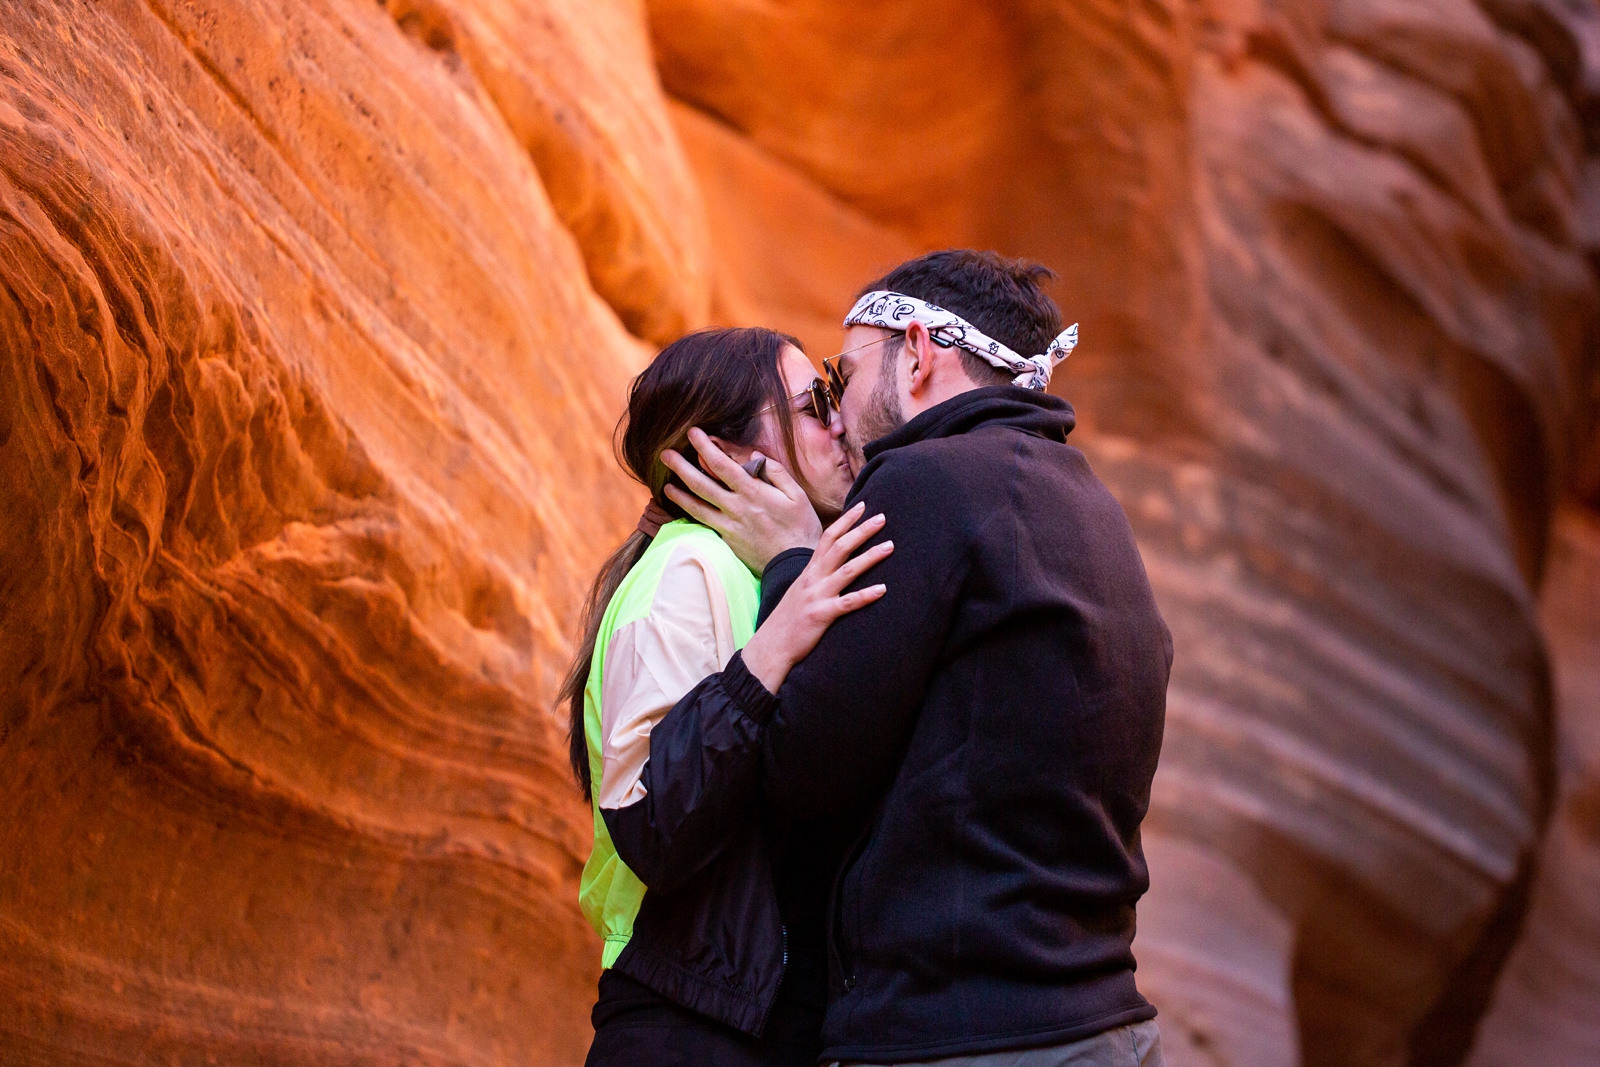 A newly engaged couple kissing after their surprise proposal in the Utah slot canyon